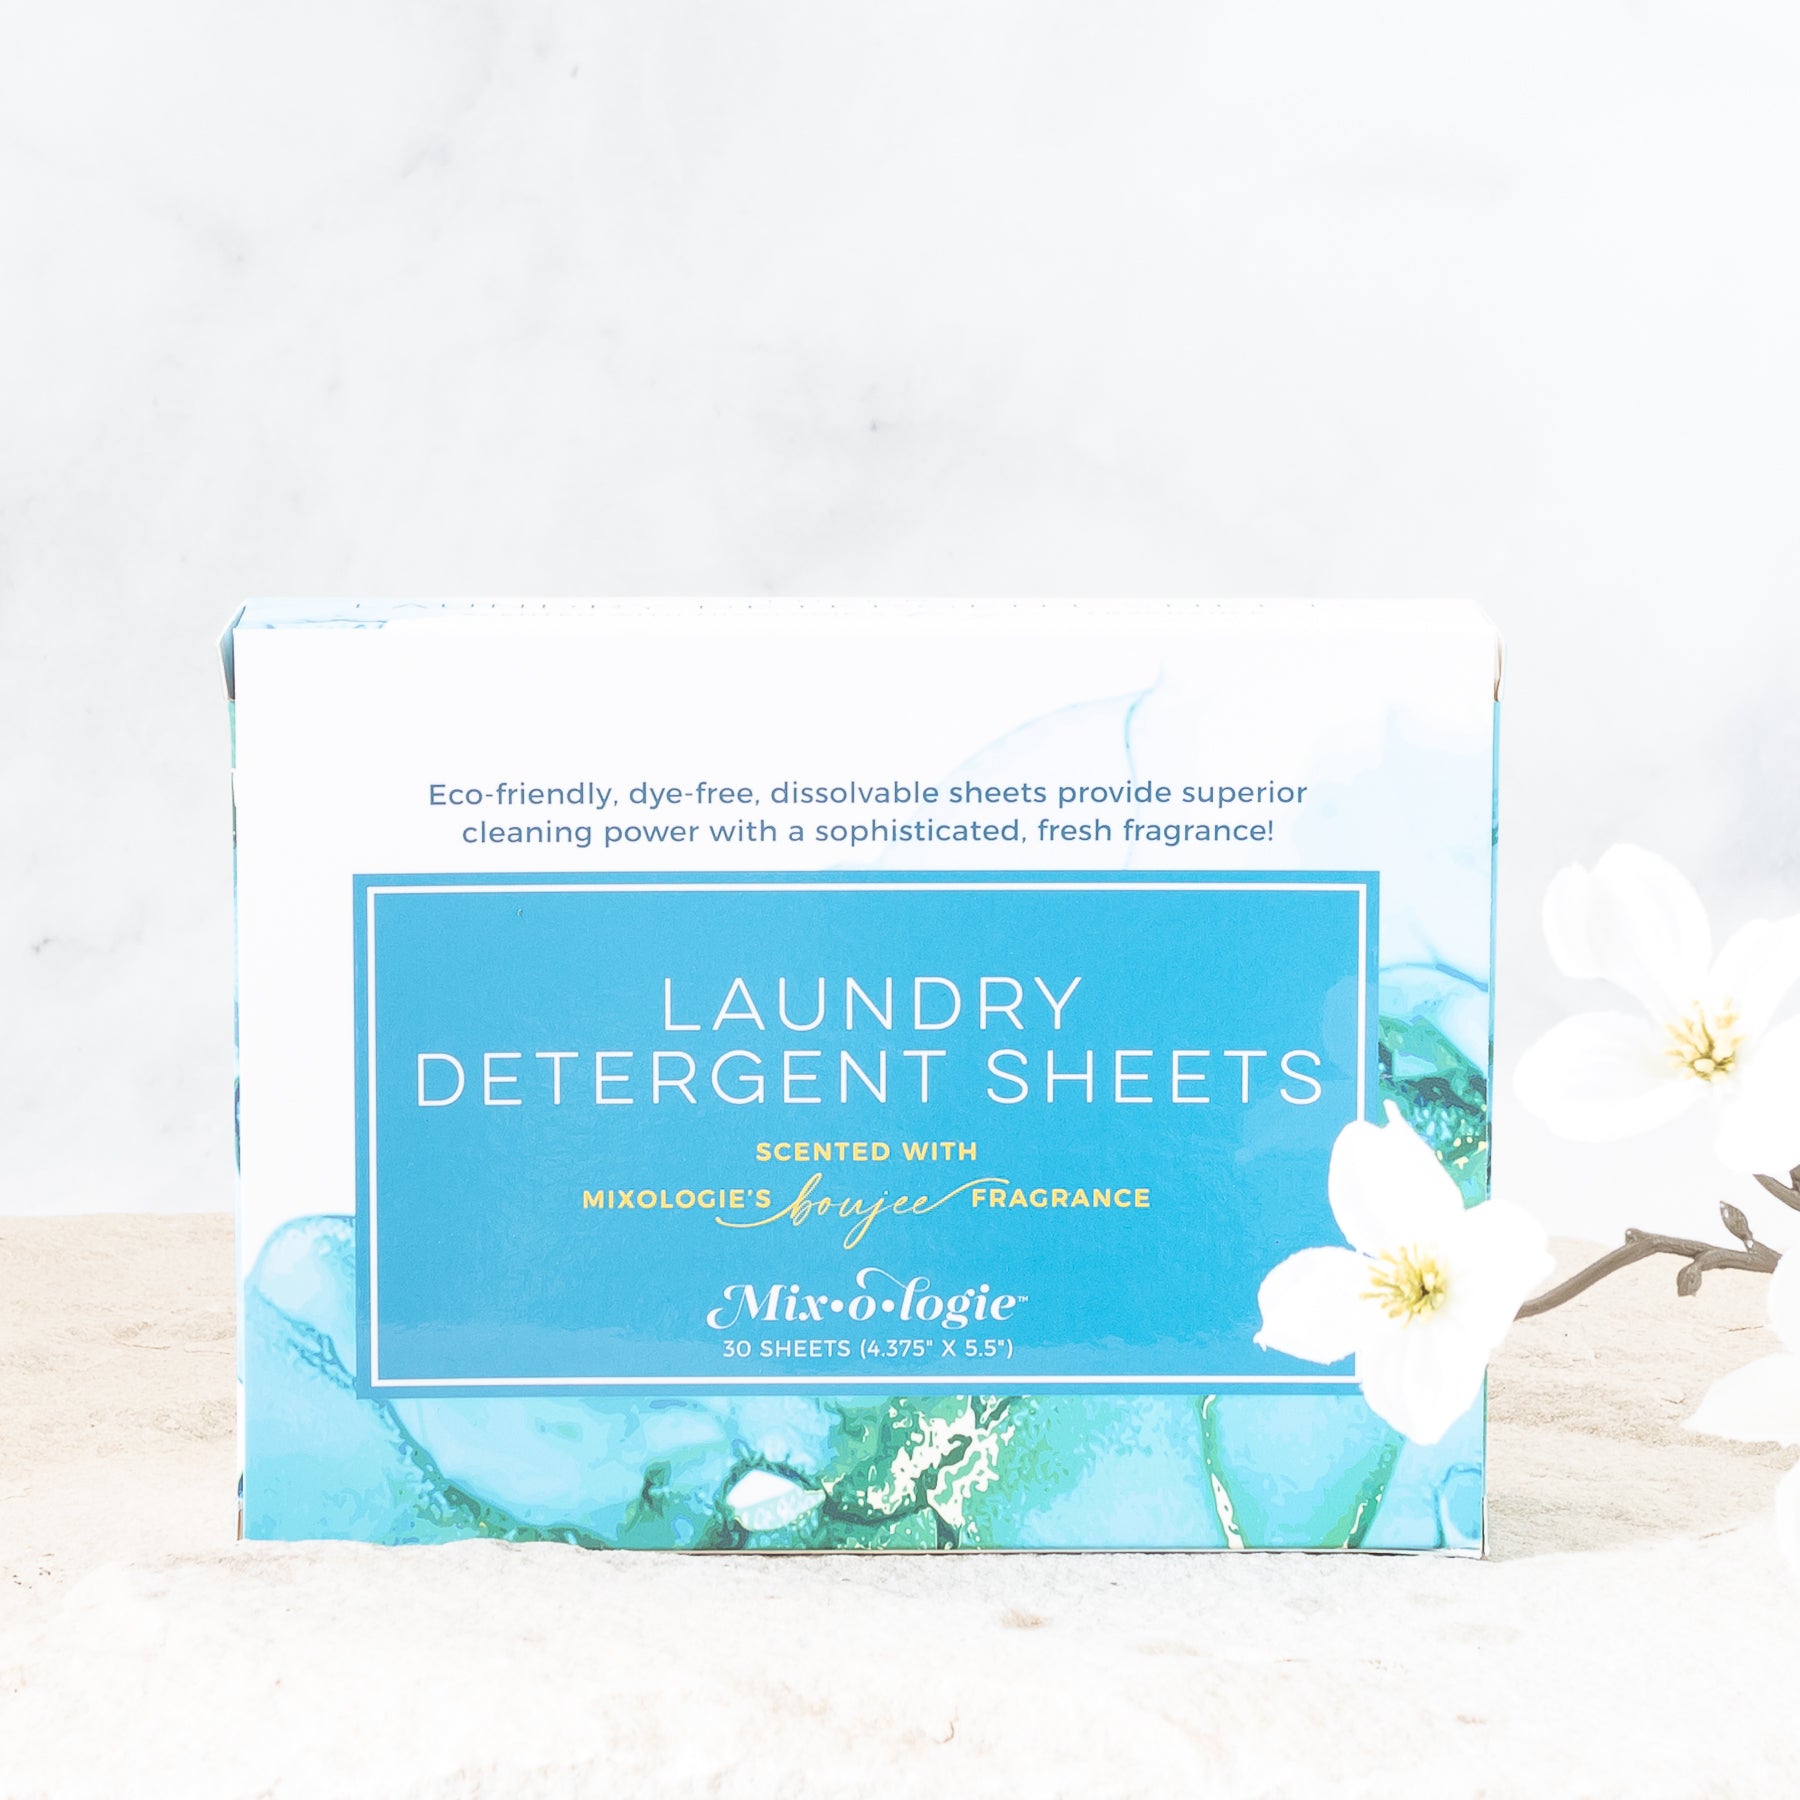 Luxury dissolvable laundry detergent sheets scented with Mixologie's Boujee fragrance. 30 of the 4.375" X 5.5" sized sheets in rectangle box. 